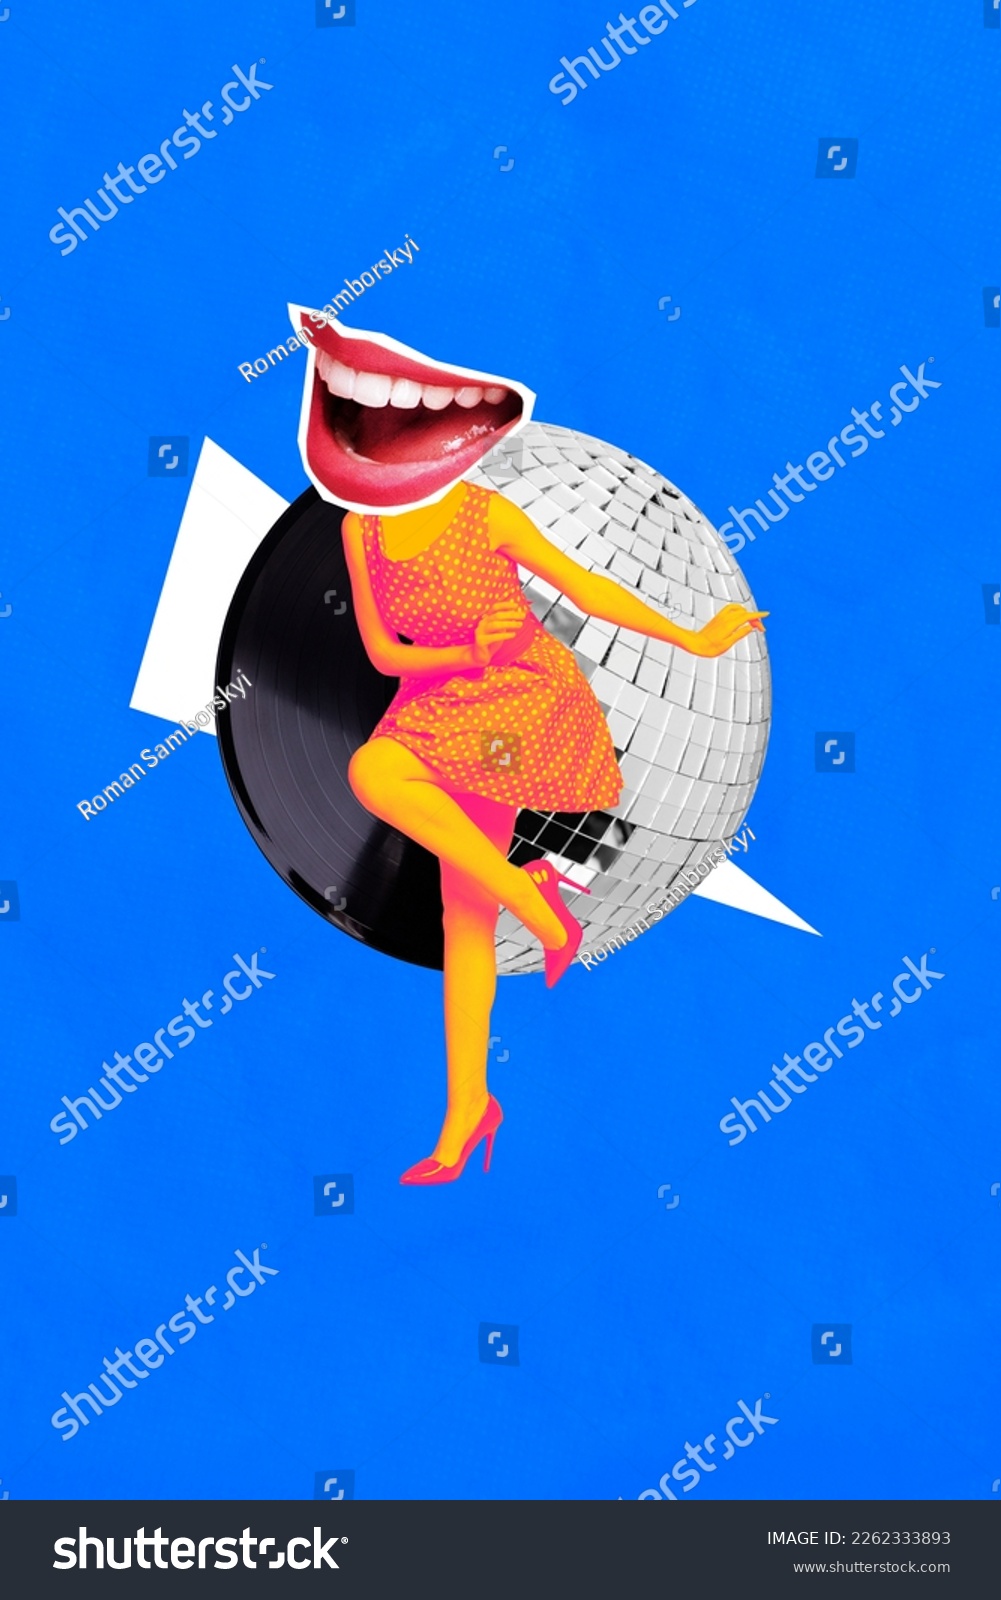 Vertical collage image of overjoyed mini person dancing big smiling mouth instead head vinyl record disco ball isolated on blue background #2262333893